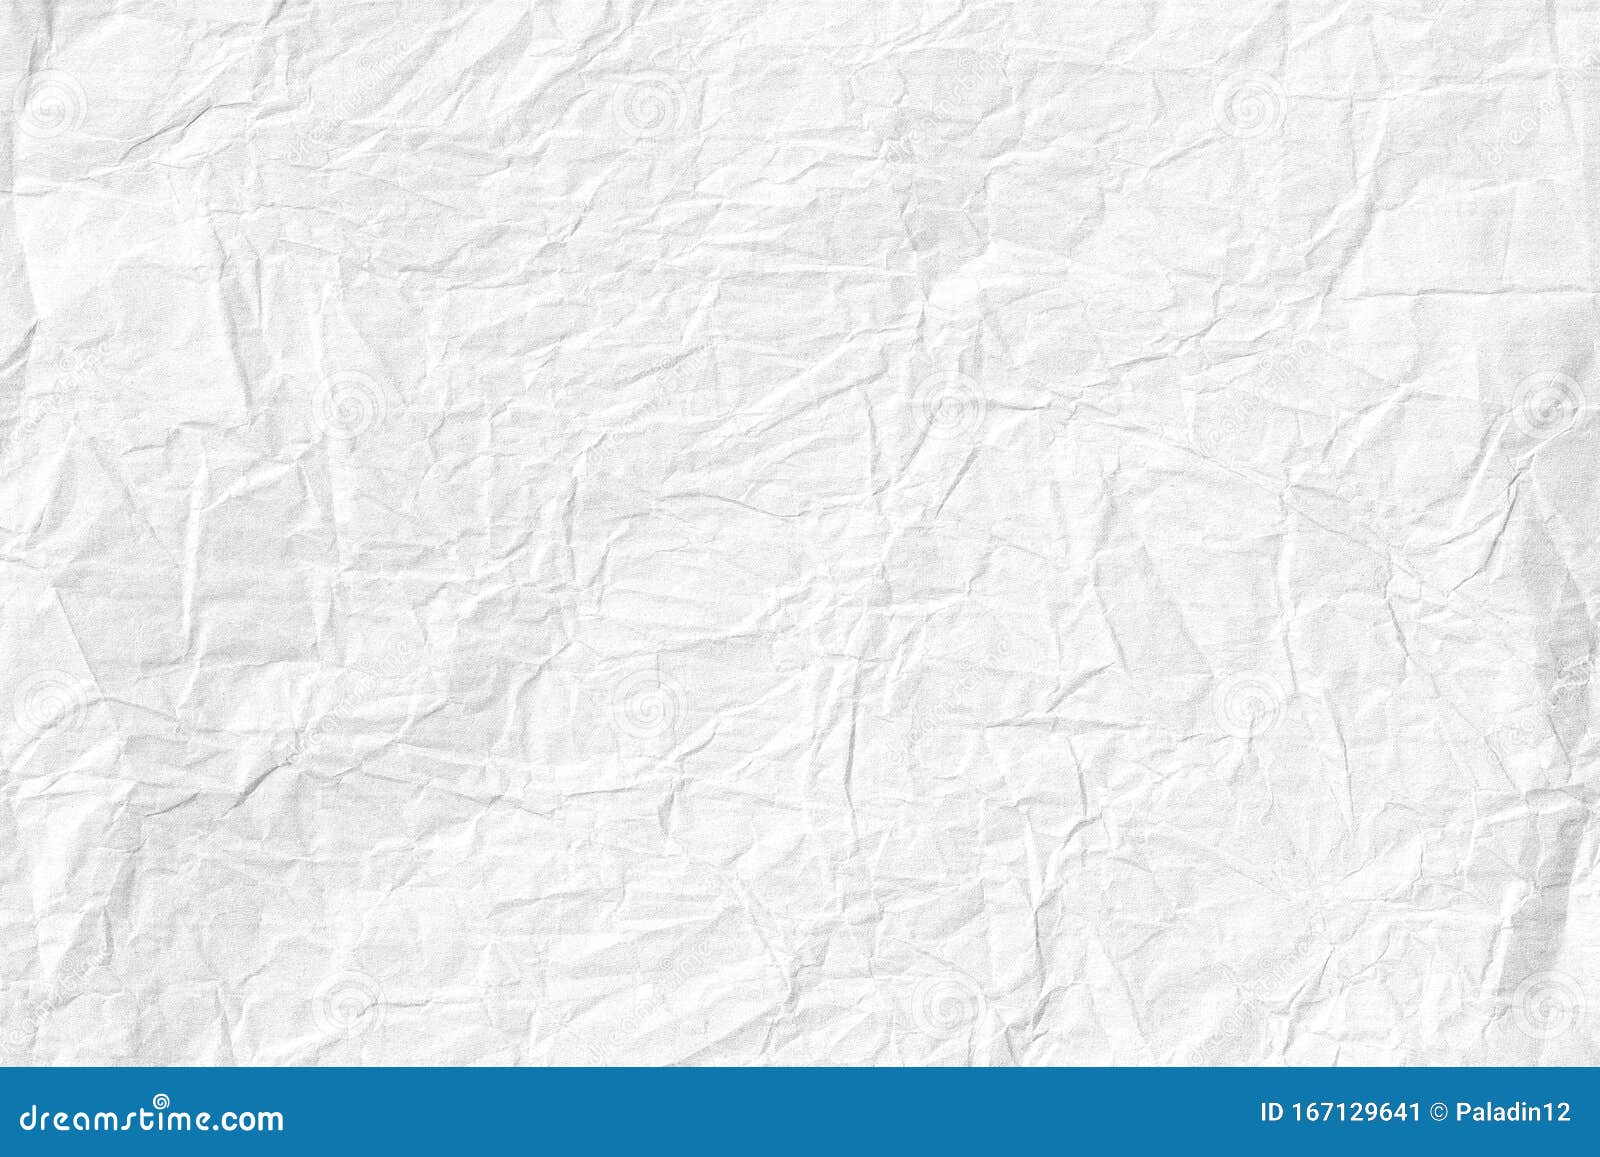 Old Crumpled White Paper Texture Stock Image - Image of material, grunge:  167129641